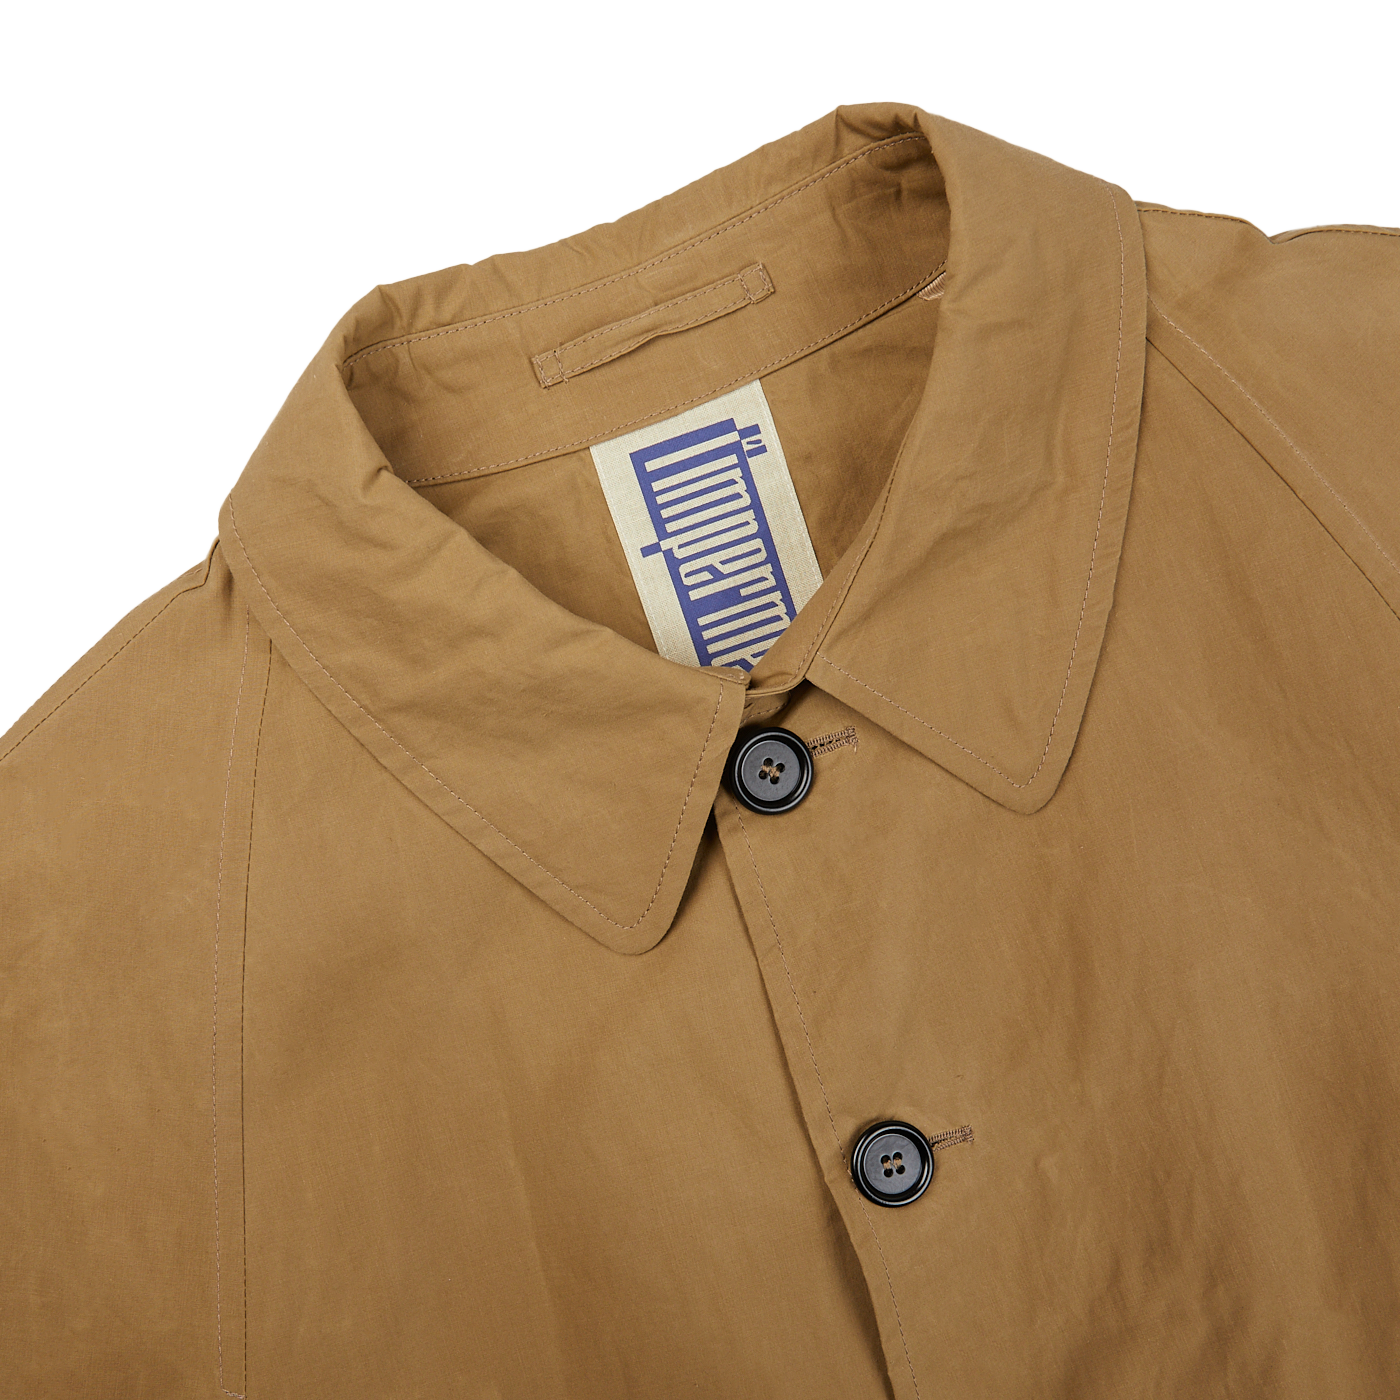 A Dark Beige Waxed Cotton Kamikaze Trenchcoat by L'Impermeabile on a white background.